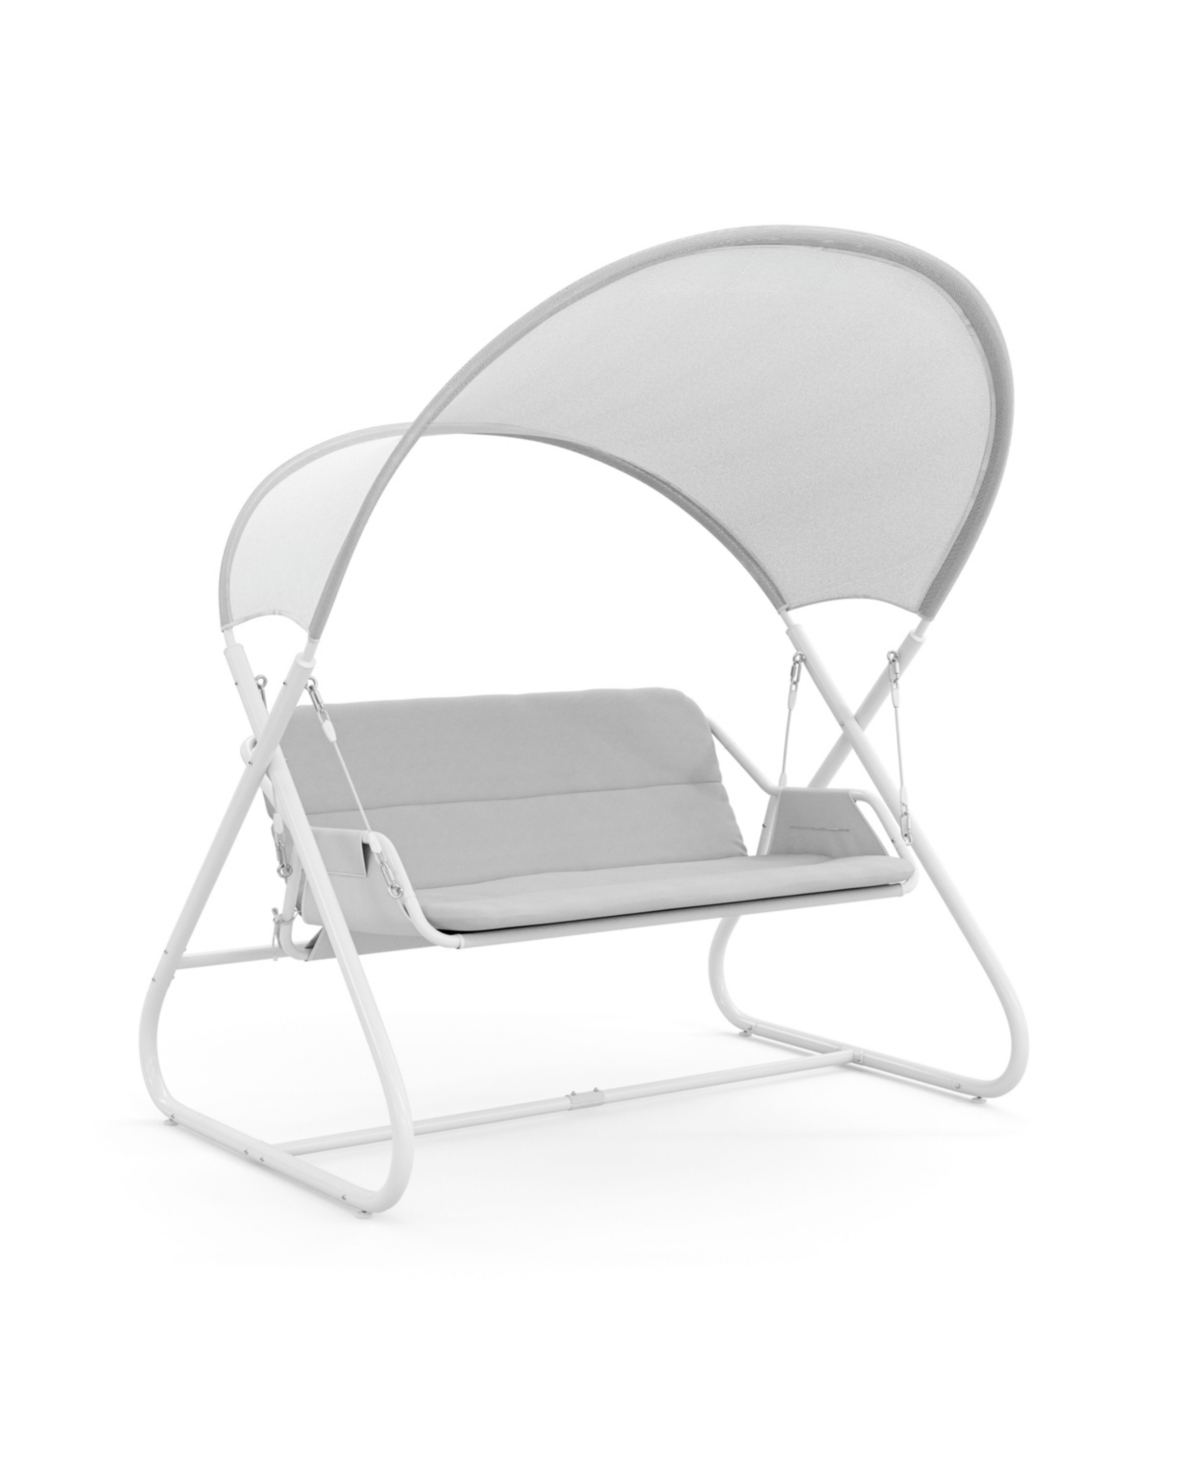 Furniture Of America 74.75" Steel Swing Bench With Mesh Canopy Cushions In White